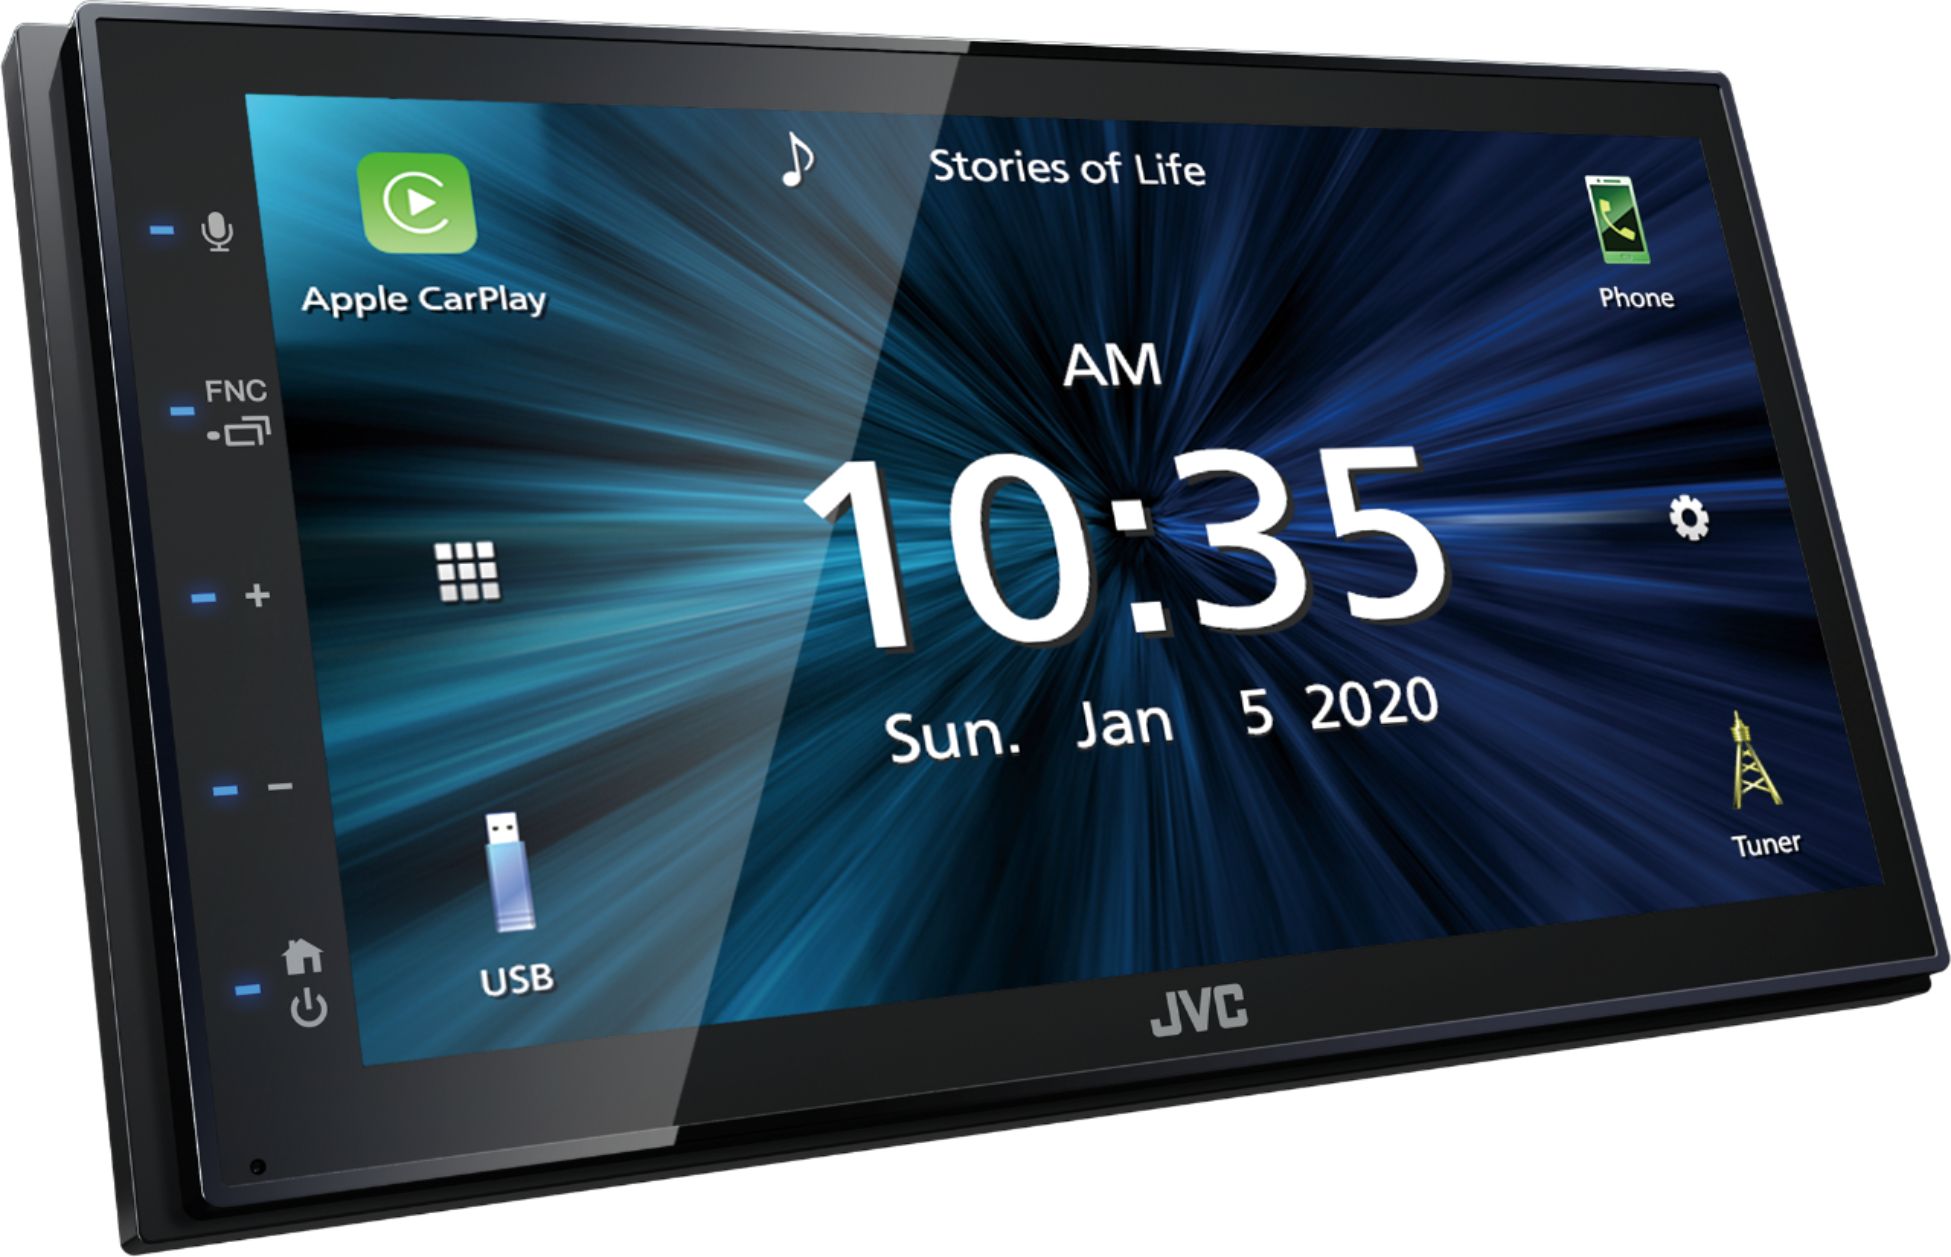 JVC Wireless CarPlay / Android Radio Unboxing and Demo